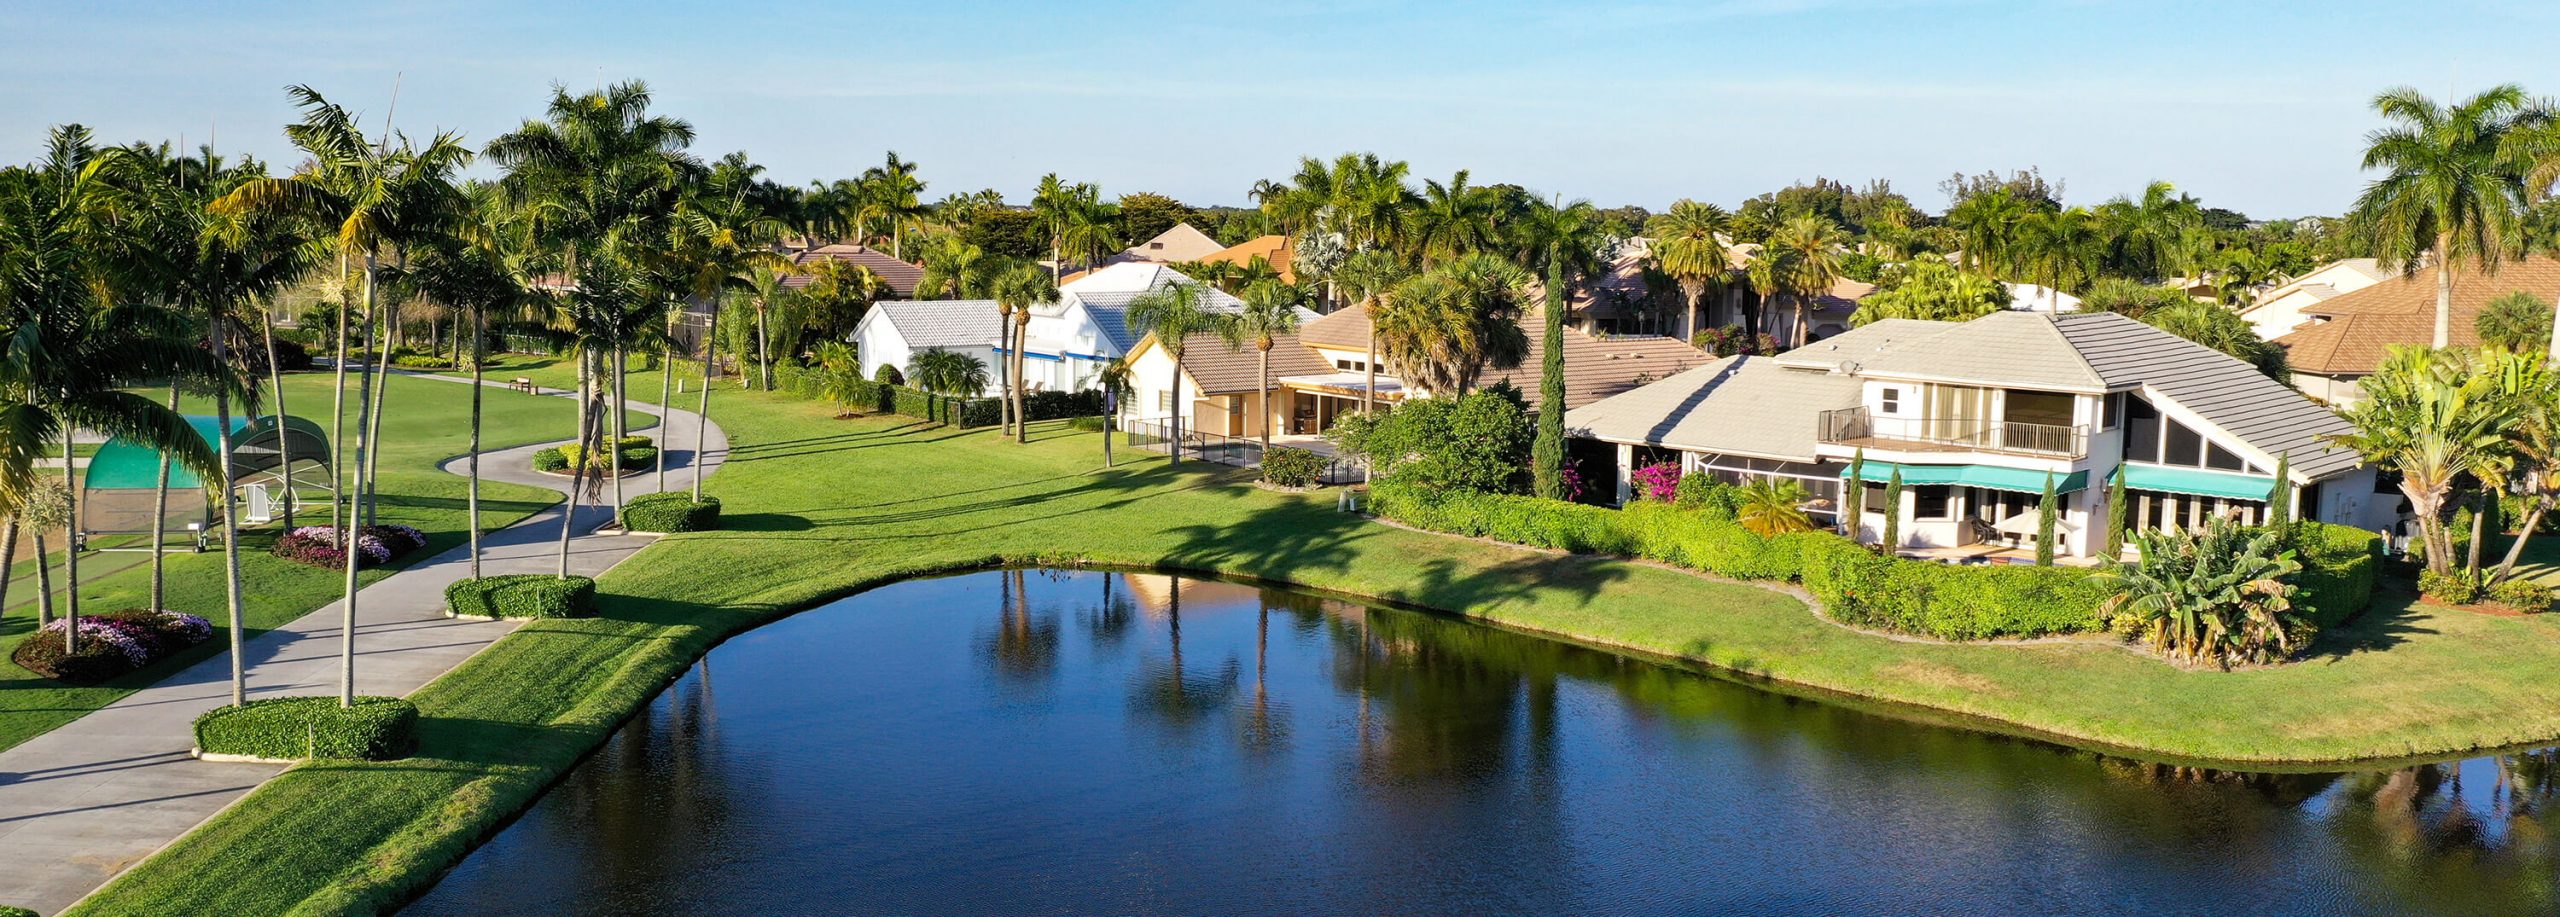 10 Things You Should Know About Buying a Golf Home in Stonebridge Country Club, Boca Raton, FL